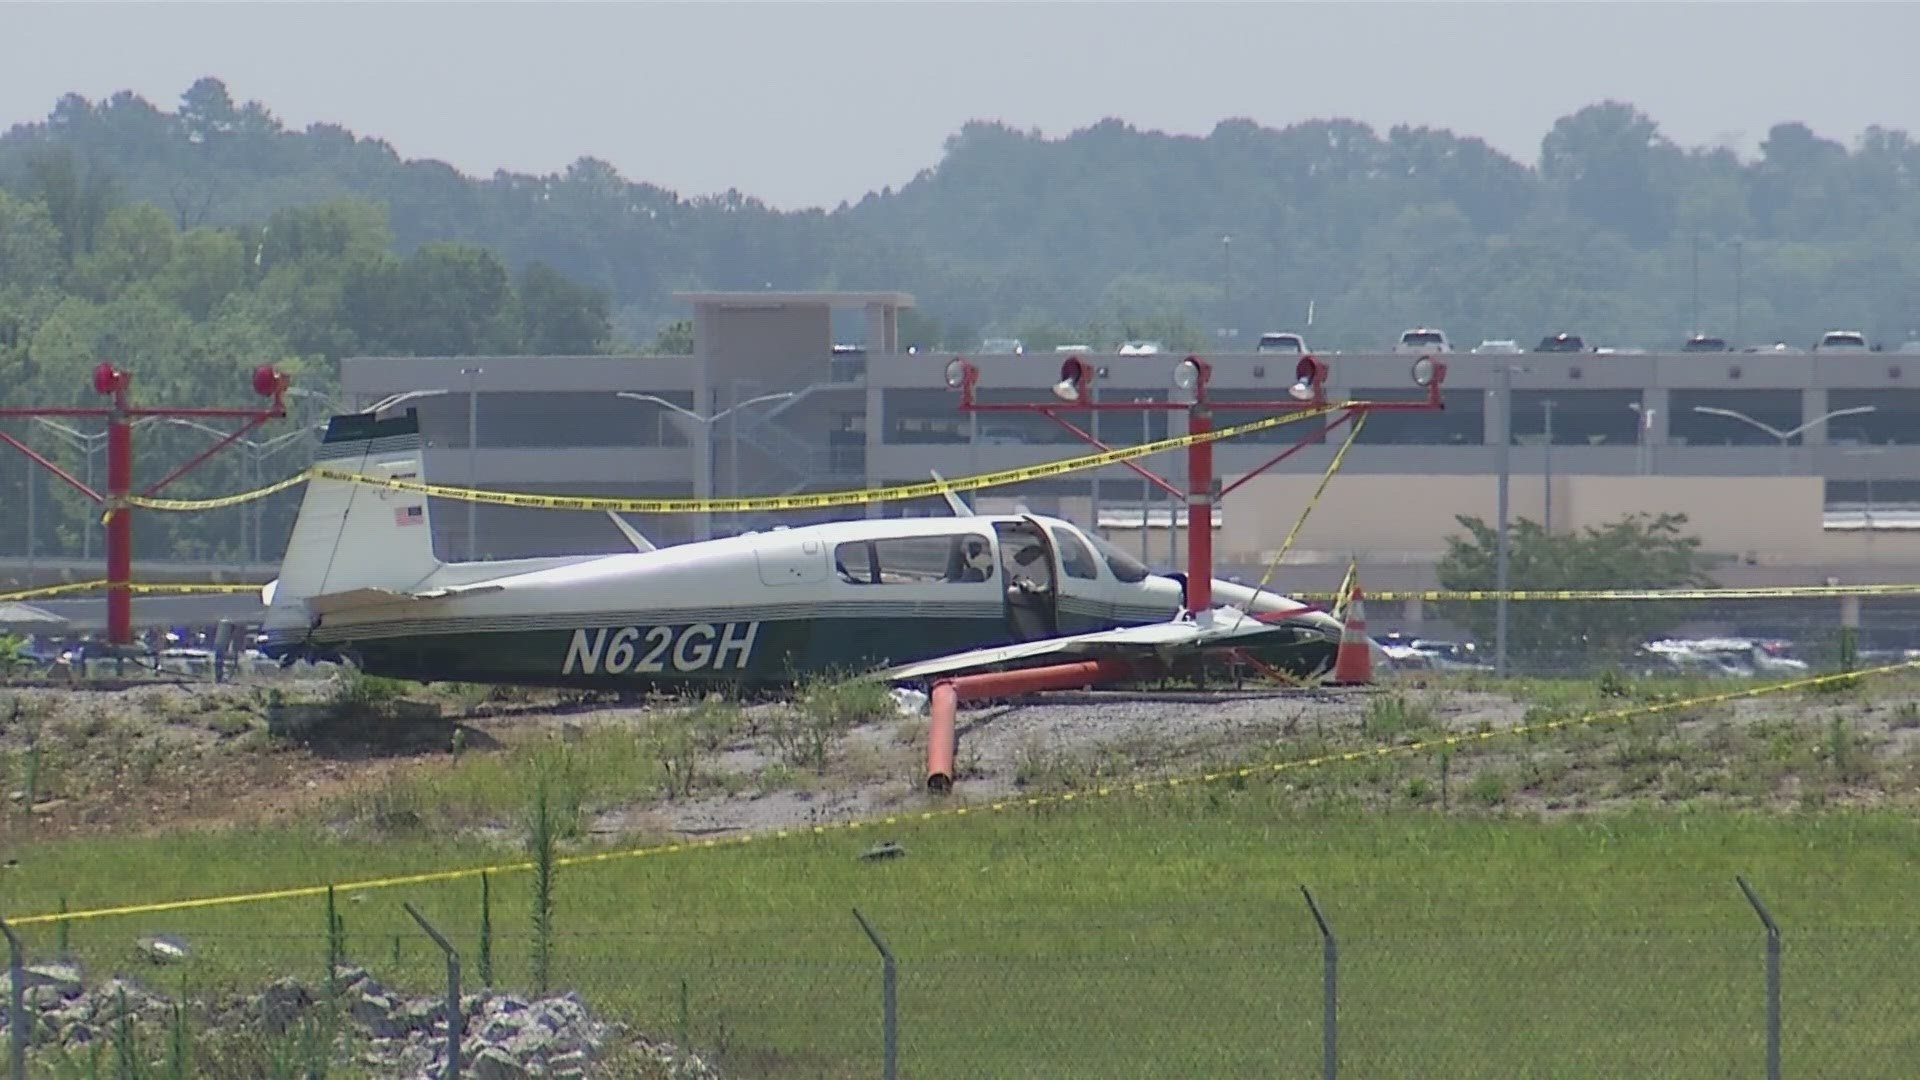 First responders said they found a single-engine aircraft that had crashed on the north end of the airport. The cause of the crash is under investigation.